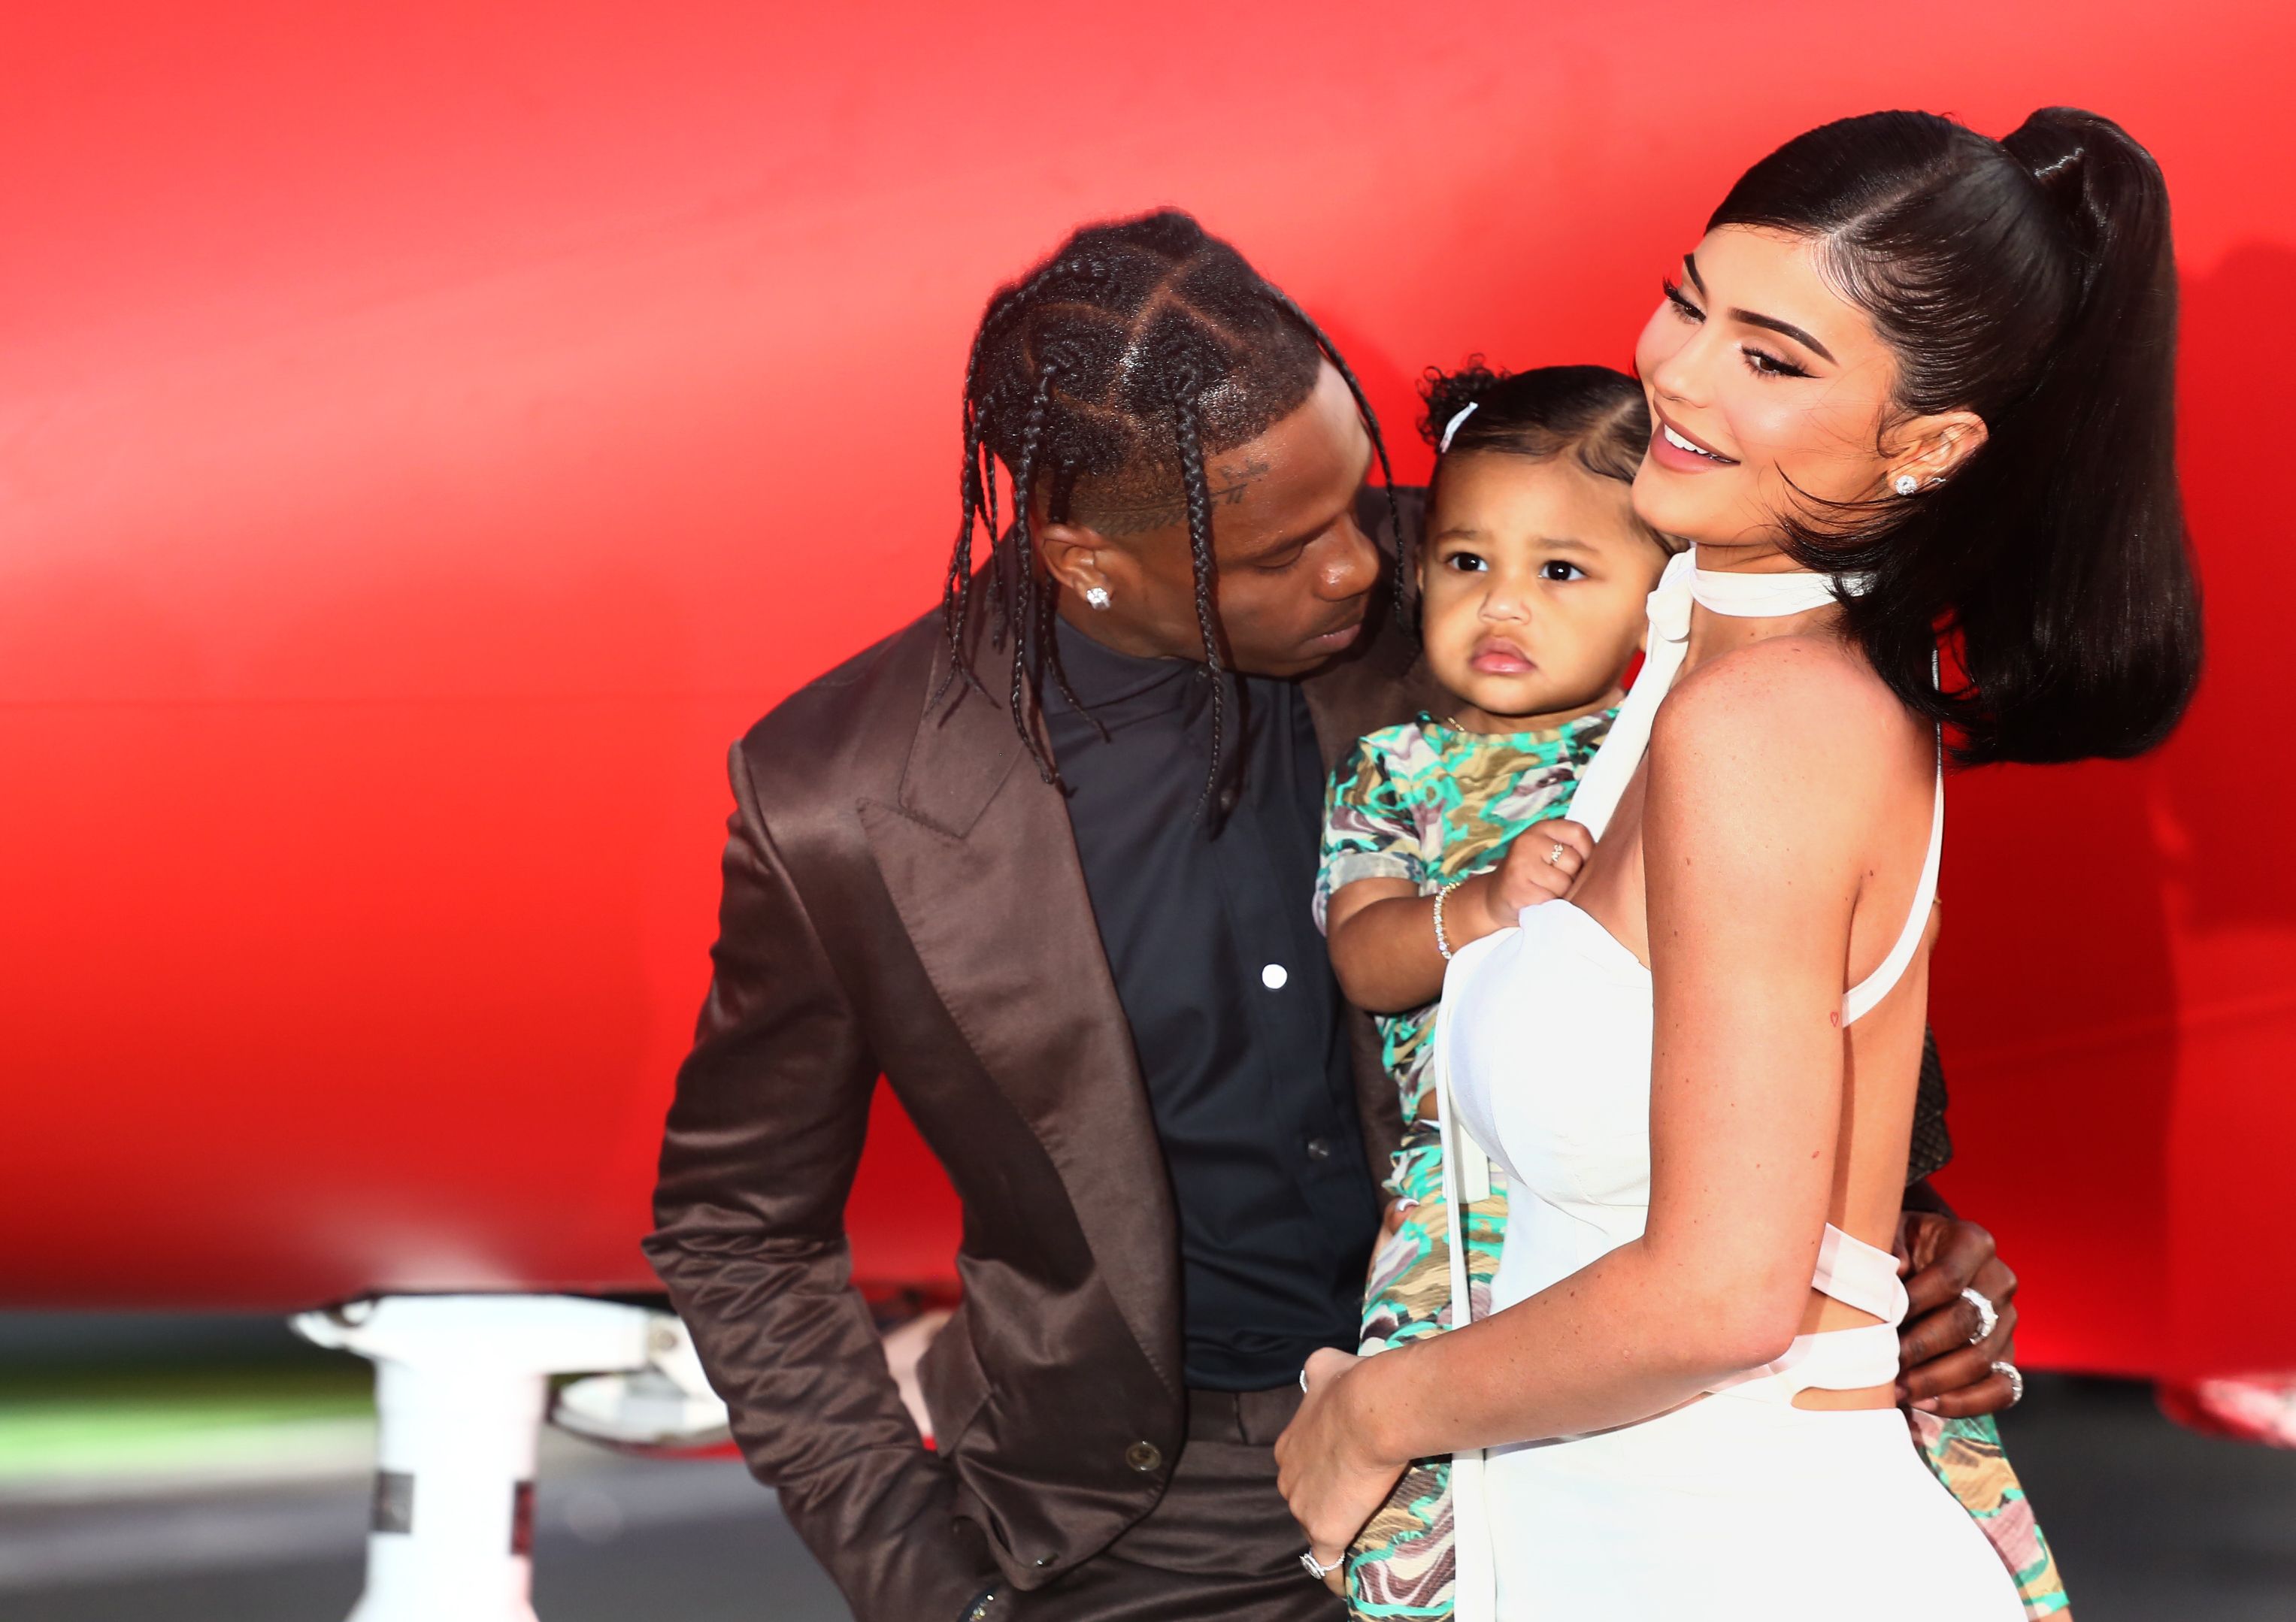 Travis Scott and Kylie Jenner at the Travis Scott: "Look Mom I Can Fly" Los Angeles Premiere at The Barker Hanger on August 27, 2019 | Photo: Getty Images